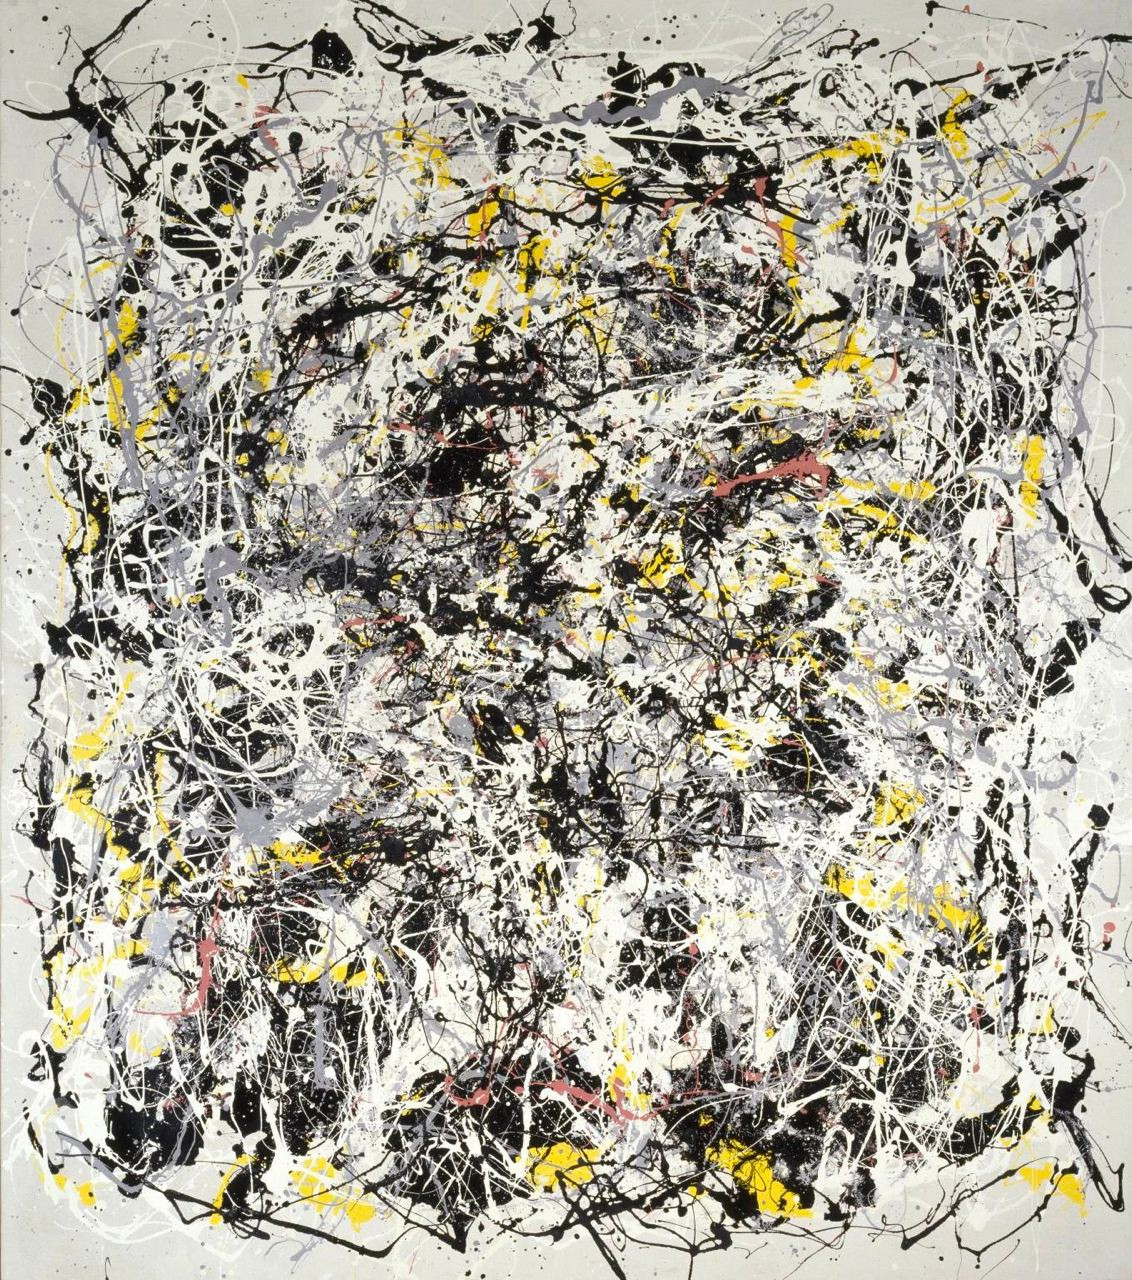 Art & Language, Portrait of&nbsp;V.I.&nbsp;Lenin with Cap, in the Style of Jackson Pollock III, 1980. Copyright: Tate, London, 2021.